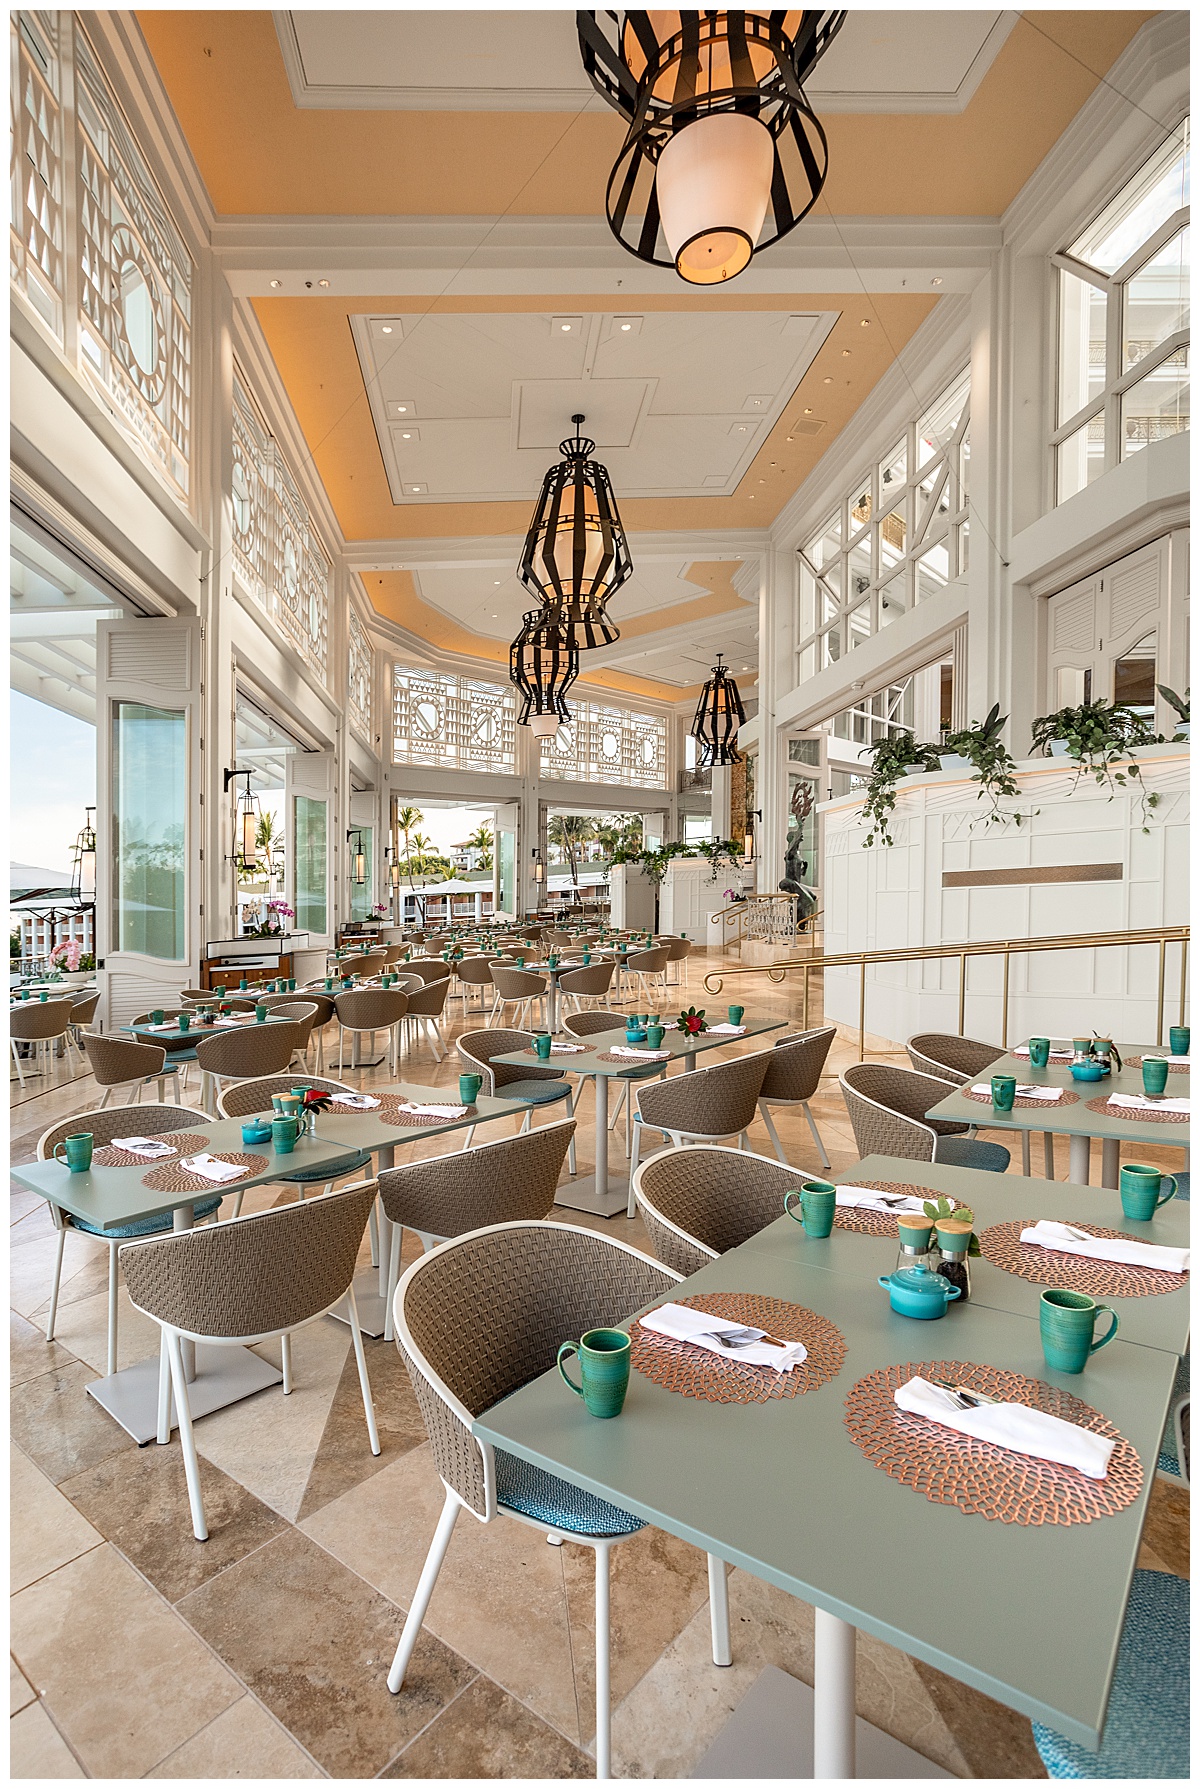 The seating area of the restaurant. The white walls are scarce as the restaurant is very open air. The tables are light teal squares and rectangles, and the chairs are rounded with brown wicker backs. The floor is a brown marble triangle tile.